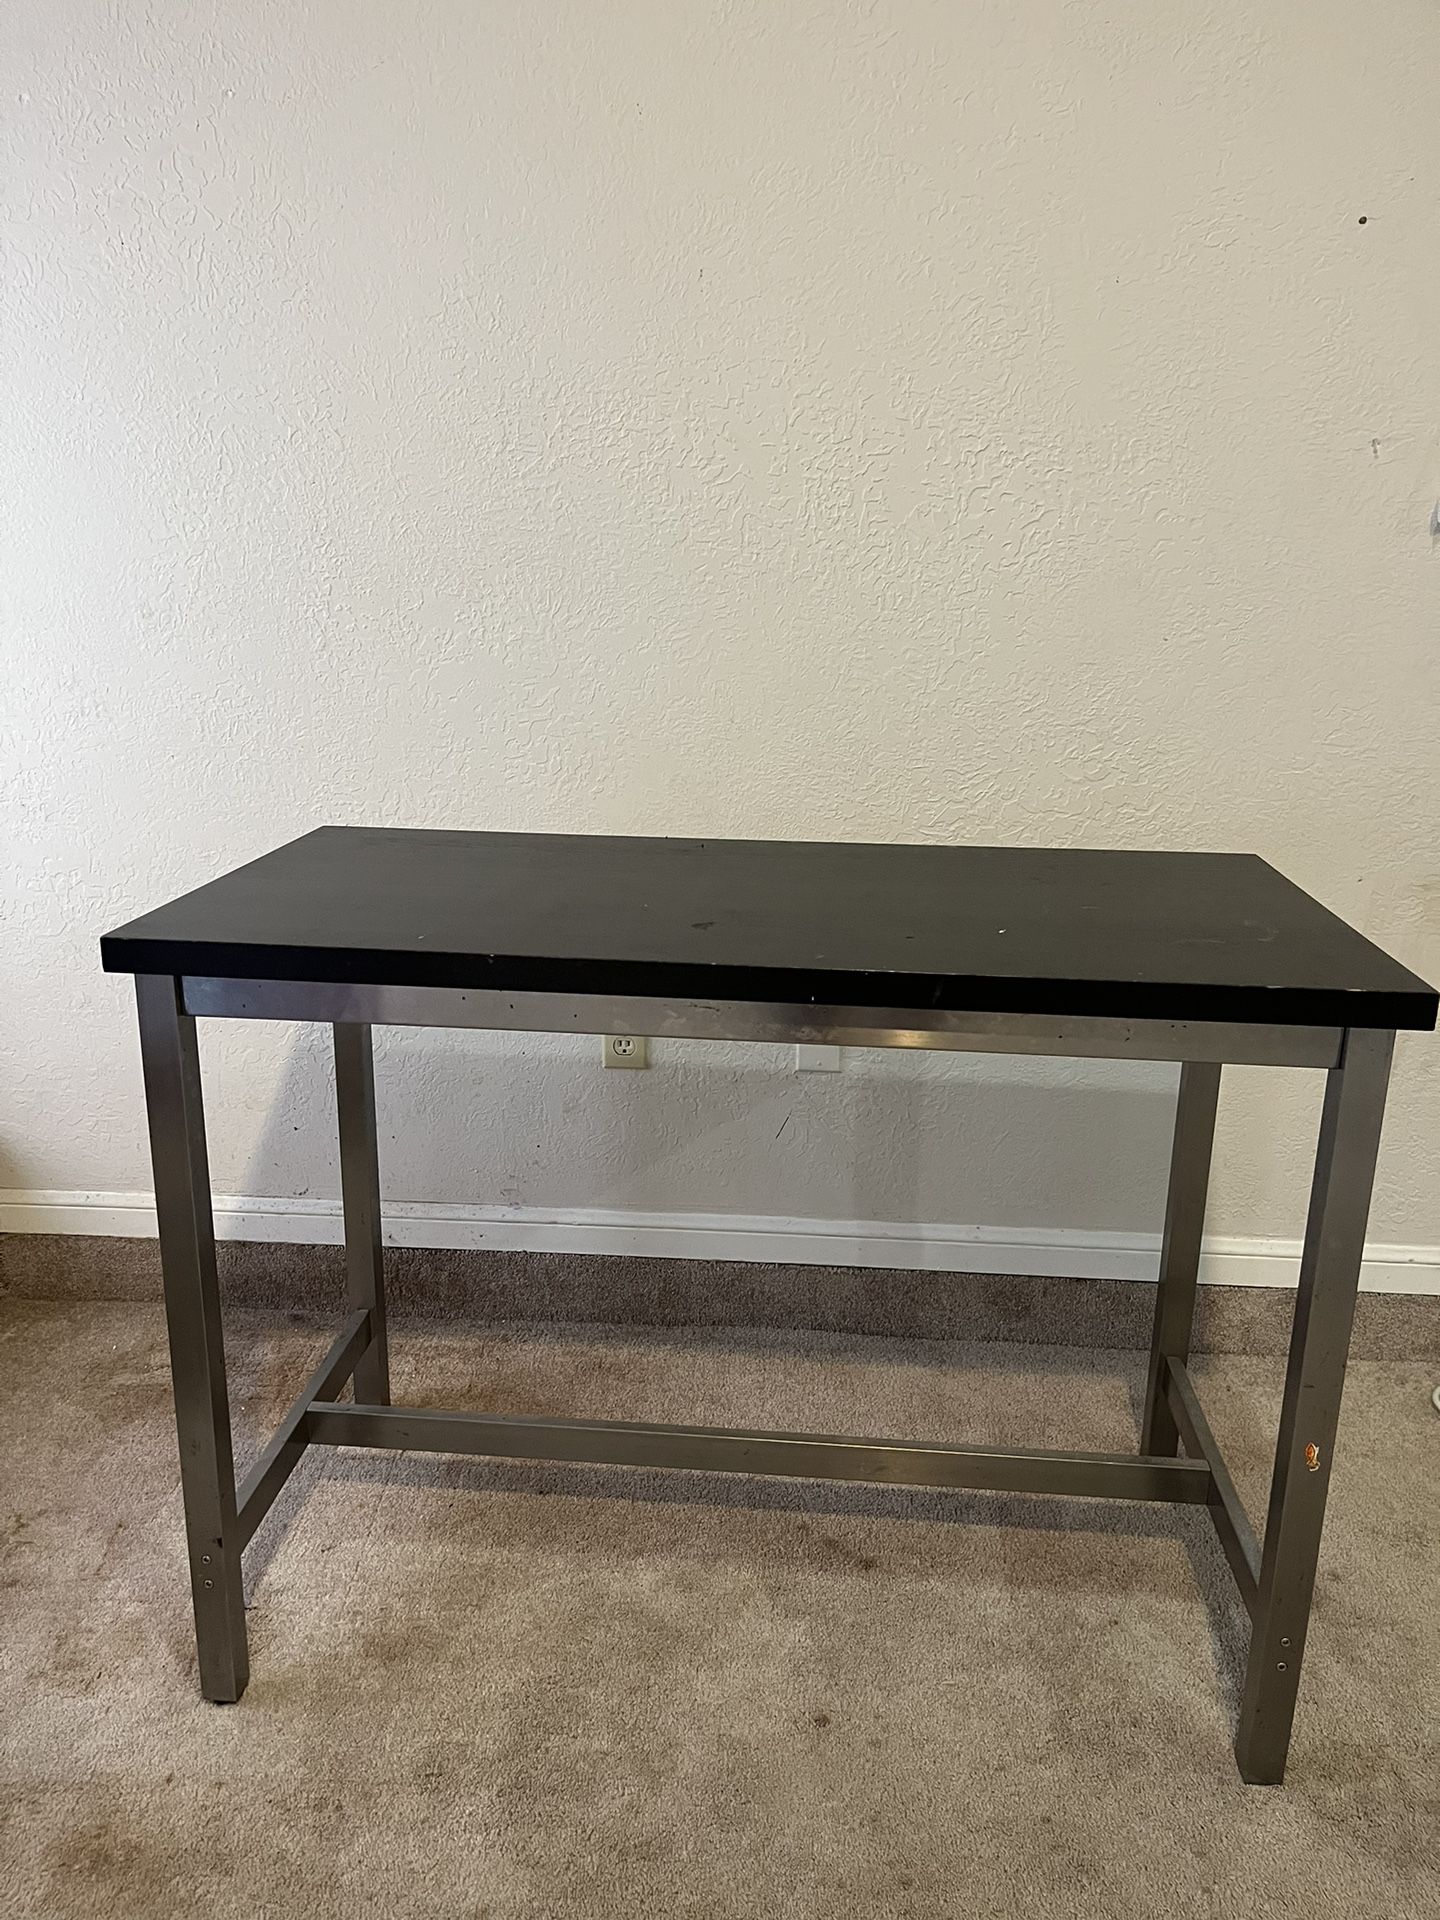 Table  You Can Use As A Craft Table Or Breakfast Bar 